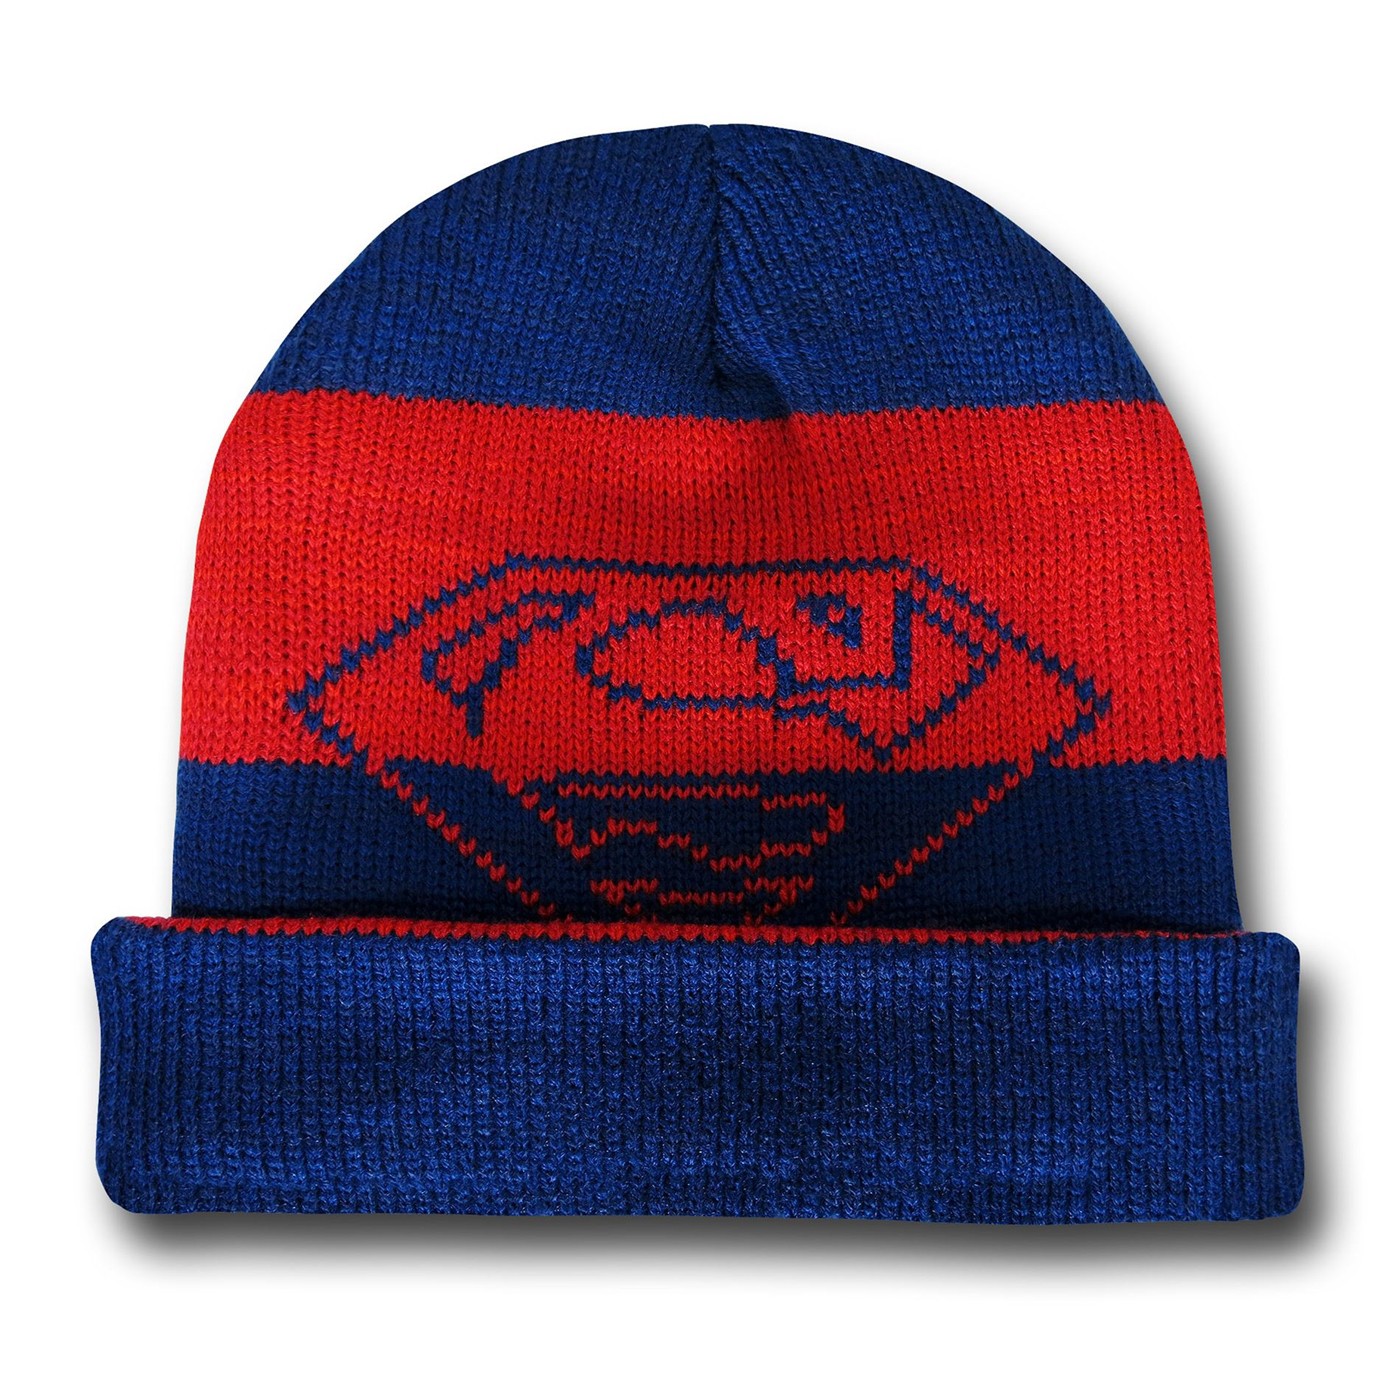 Superman Roll-Up Striped Beanie